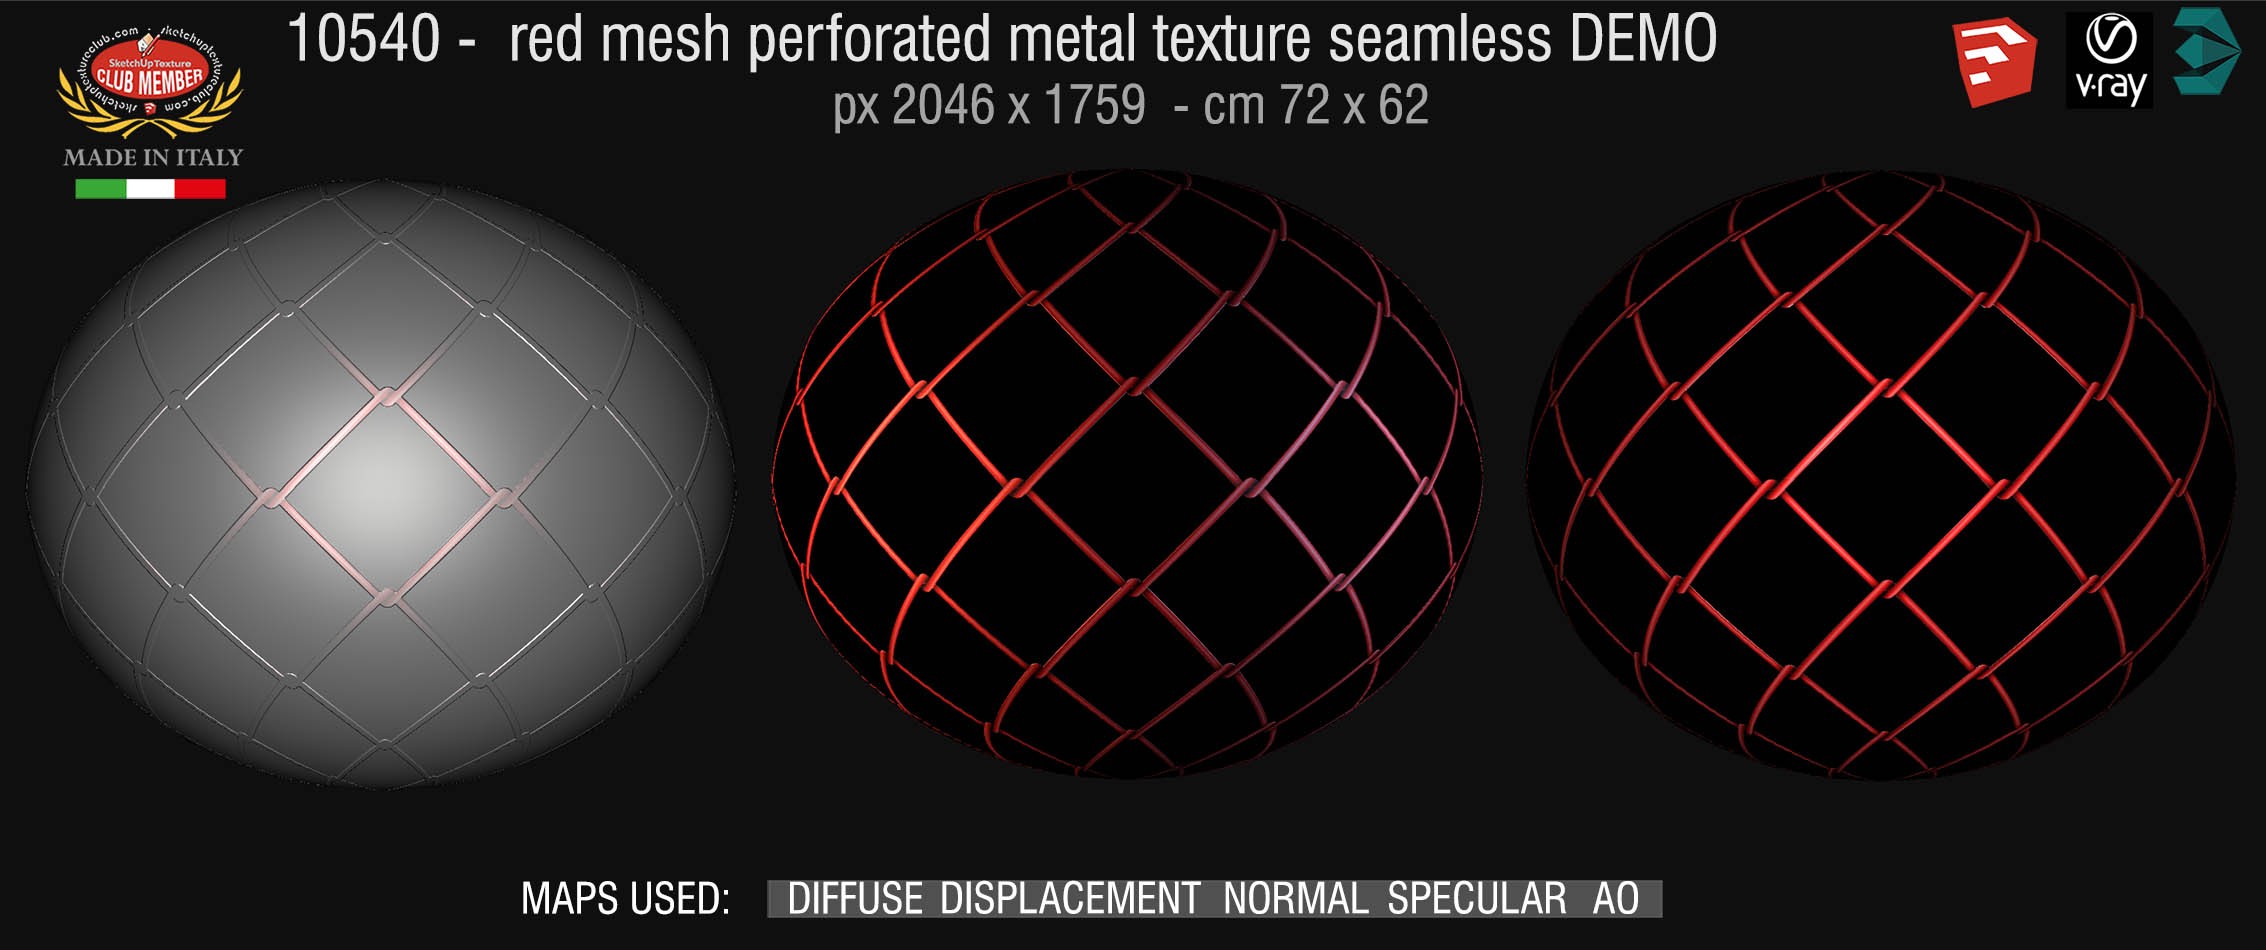 10540 HR Red Mesh perforate metal texture seamless + maps DEMO